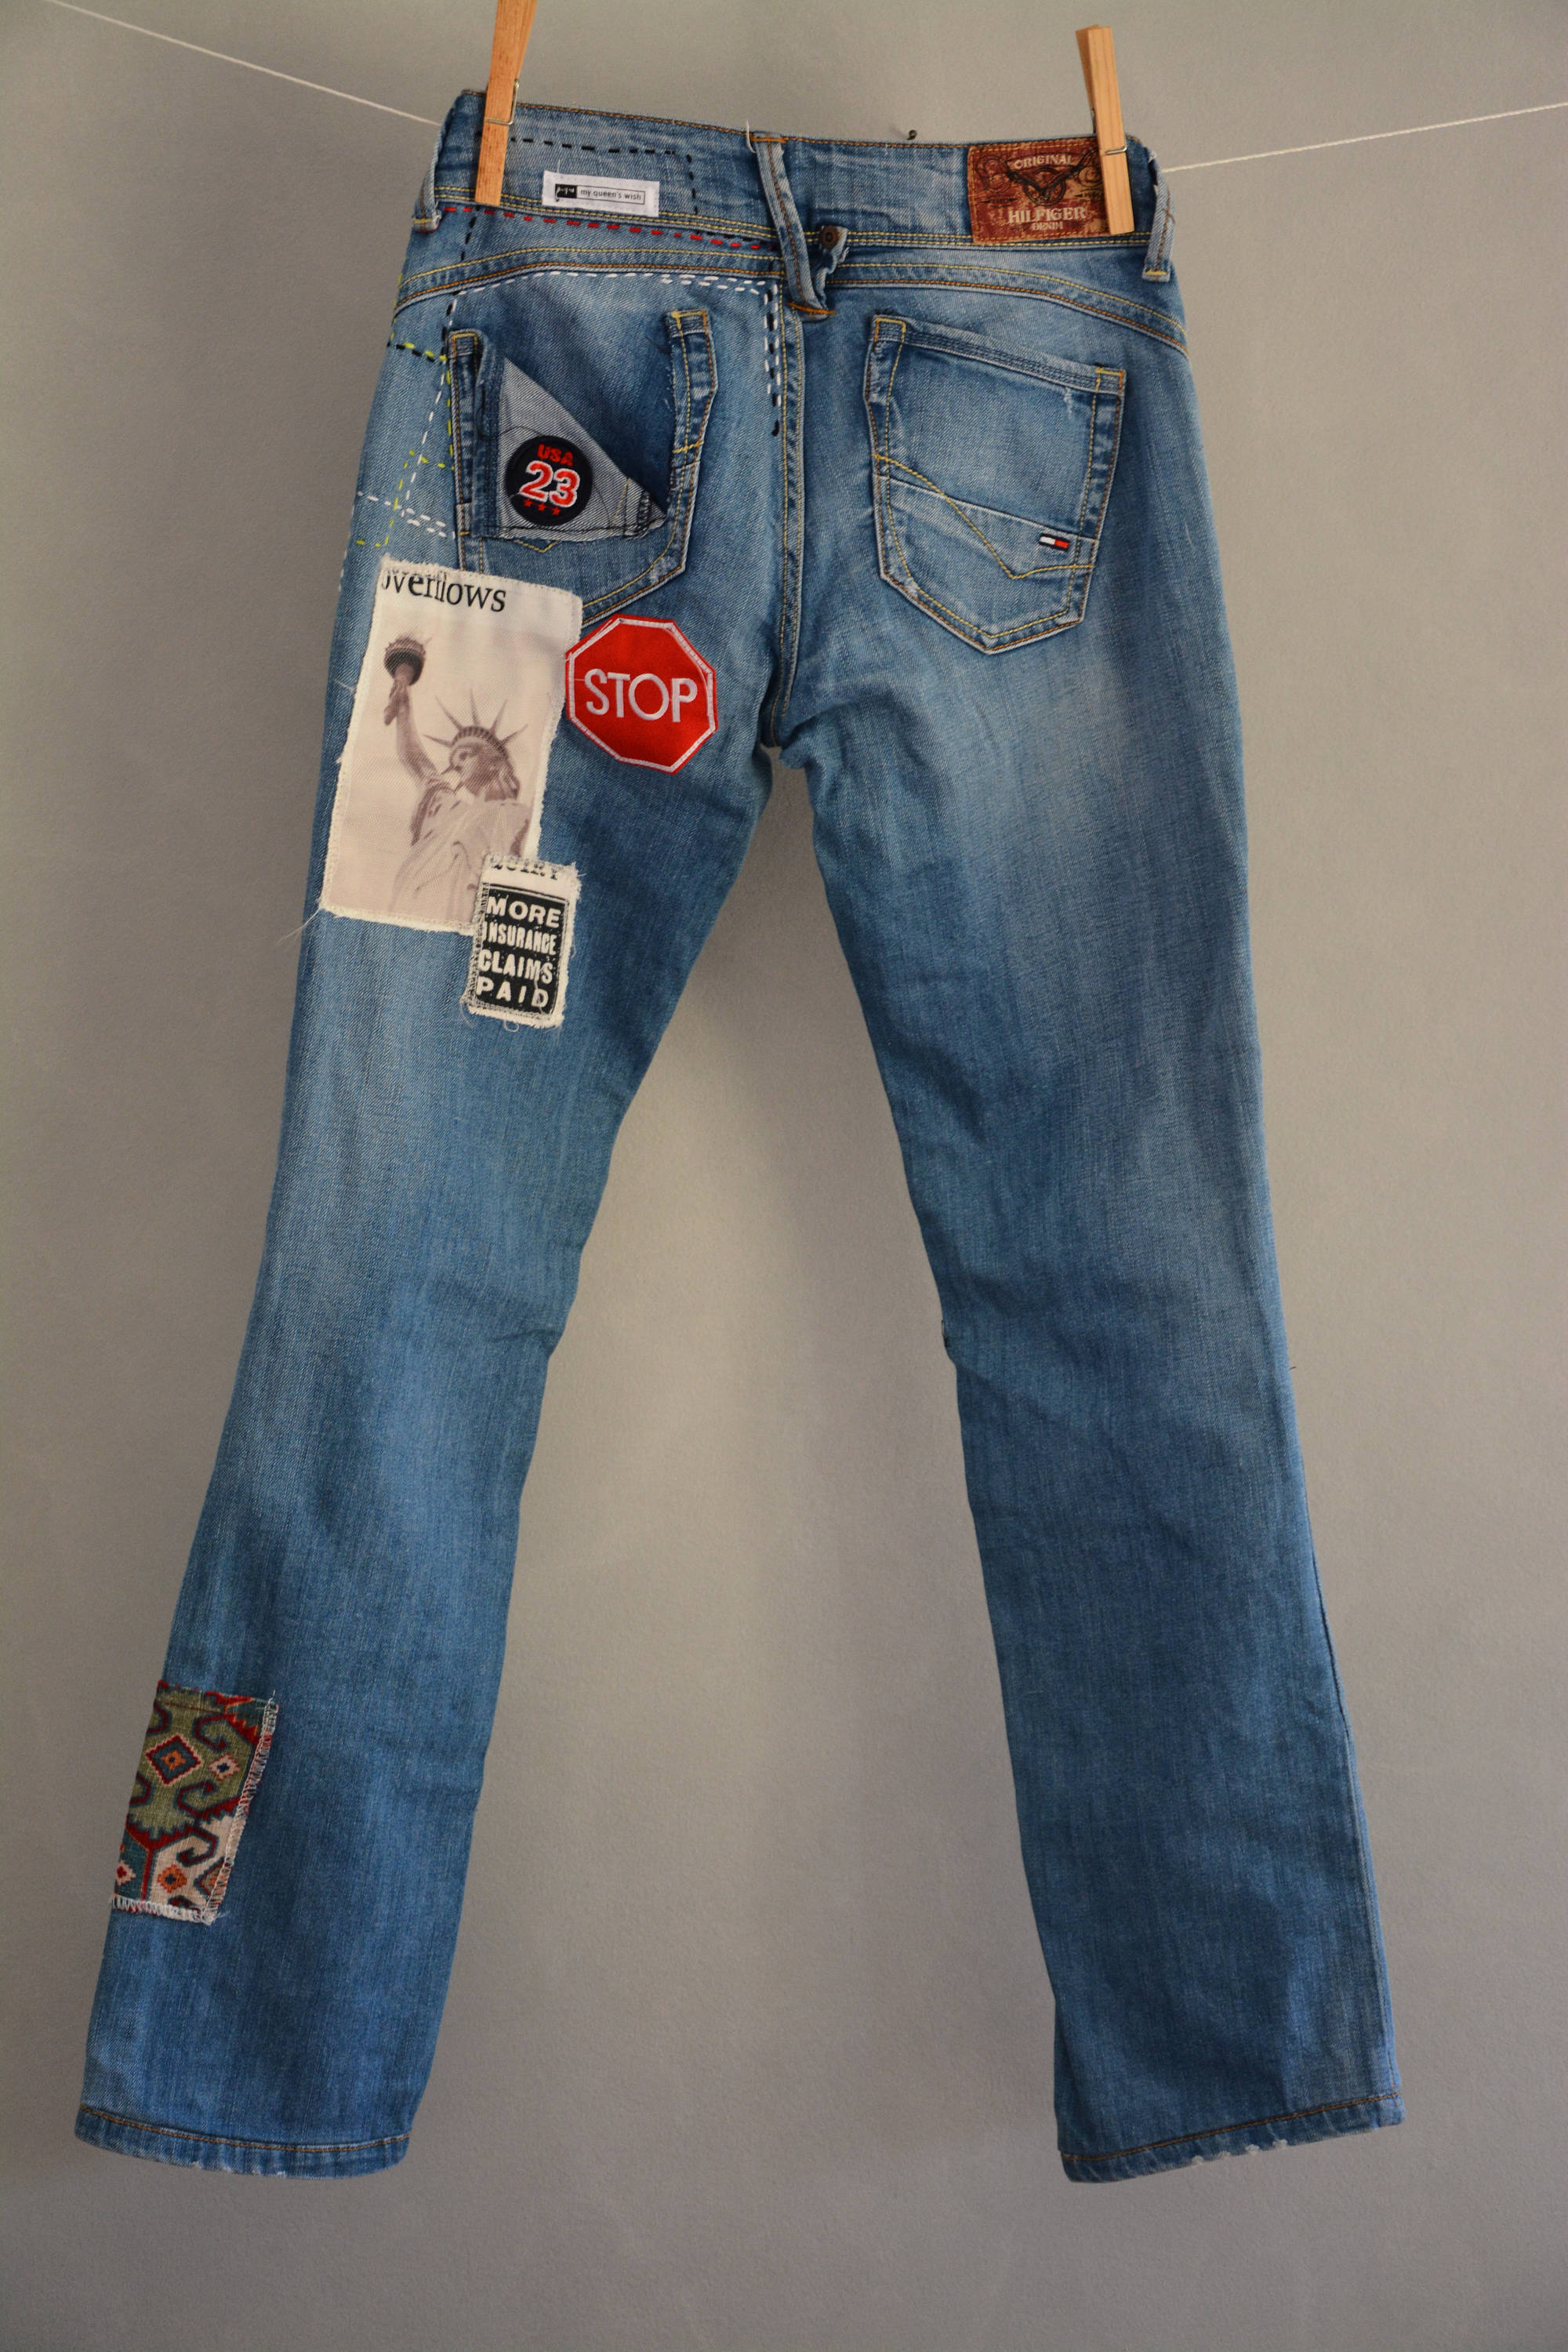 80s Vintage Levis Jeans Womens High Waisted Levi Jeans Levi - Etsy Israel